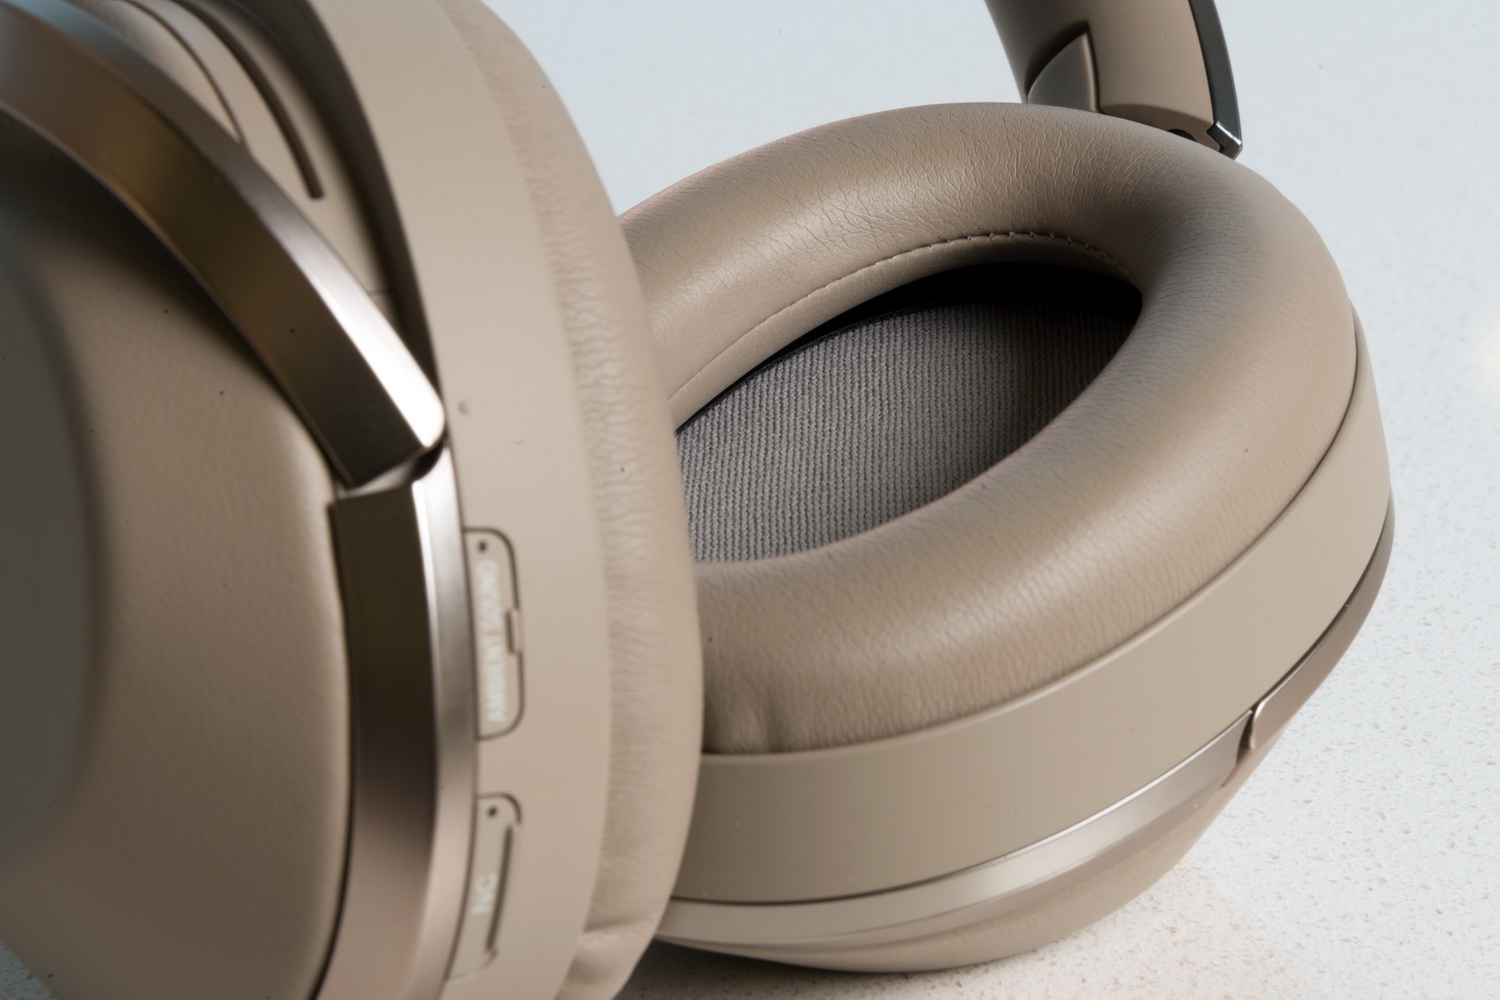 Sony MDR-1000x Review Specs, Price and Much More | Digital 